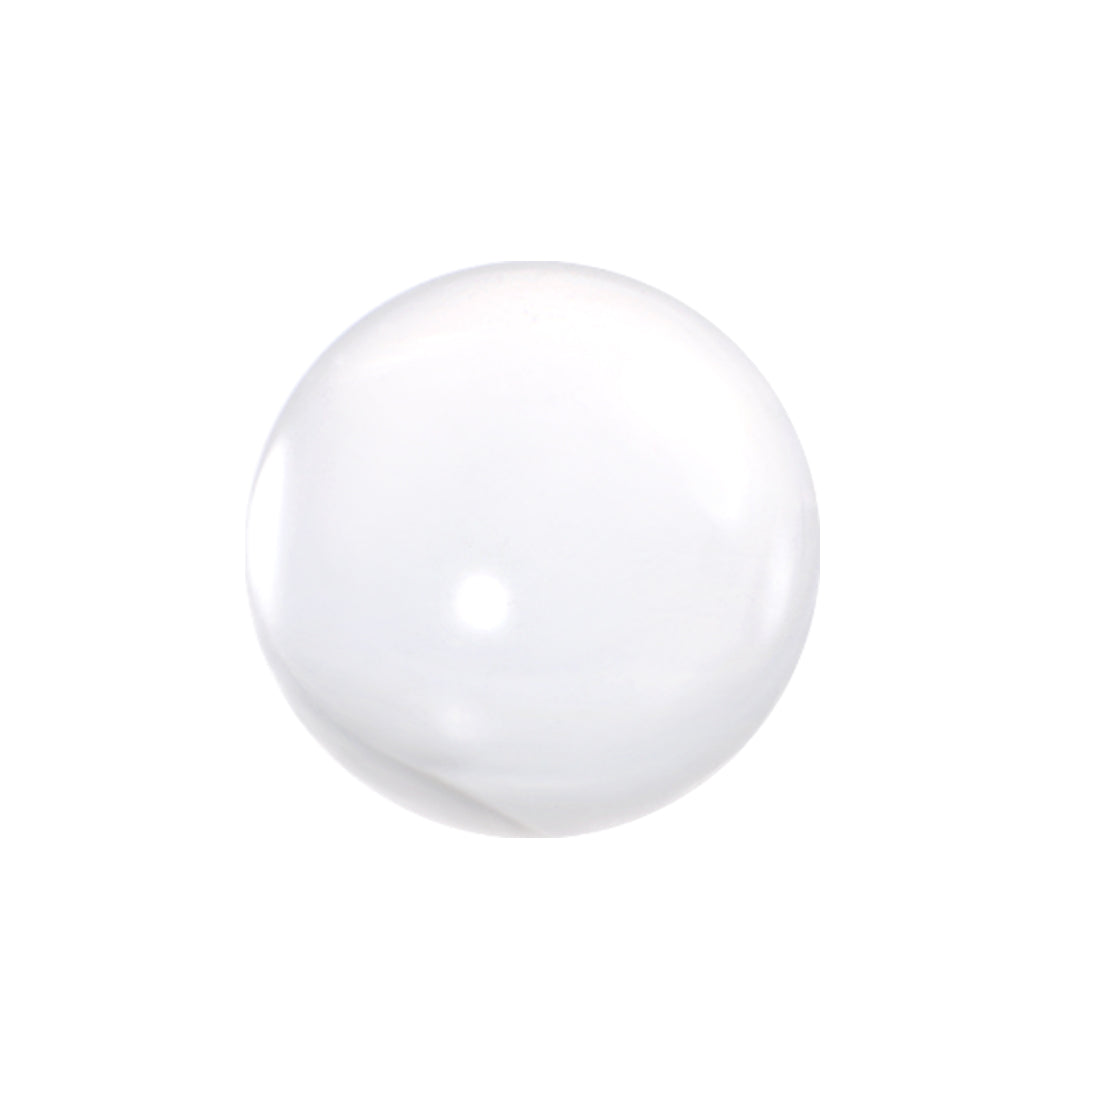 Uxcell Uxcell 10mm Diameter Acrylic Ball Clear/Transparent Sphere Ornament 0.4 Inches